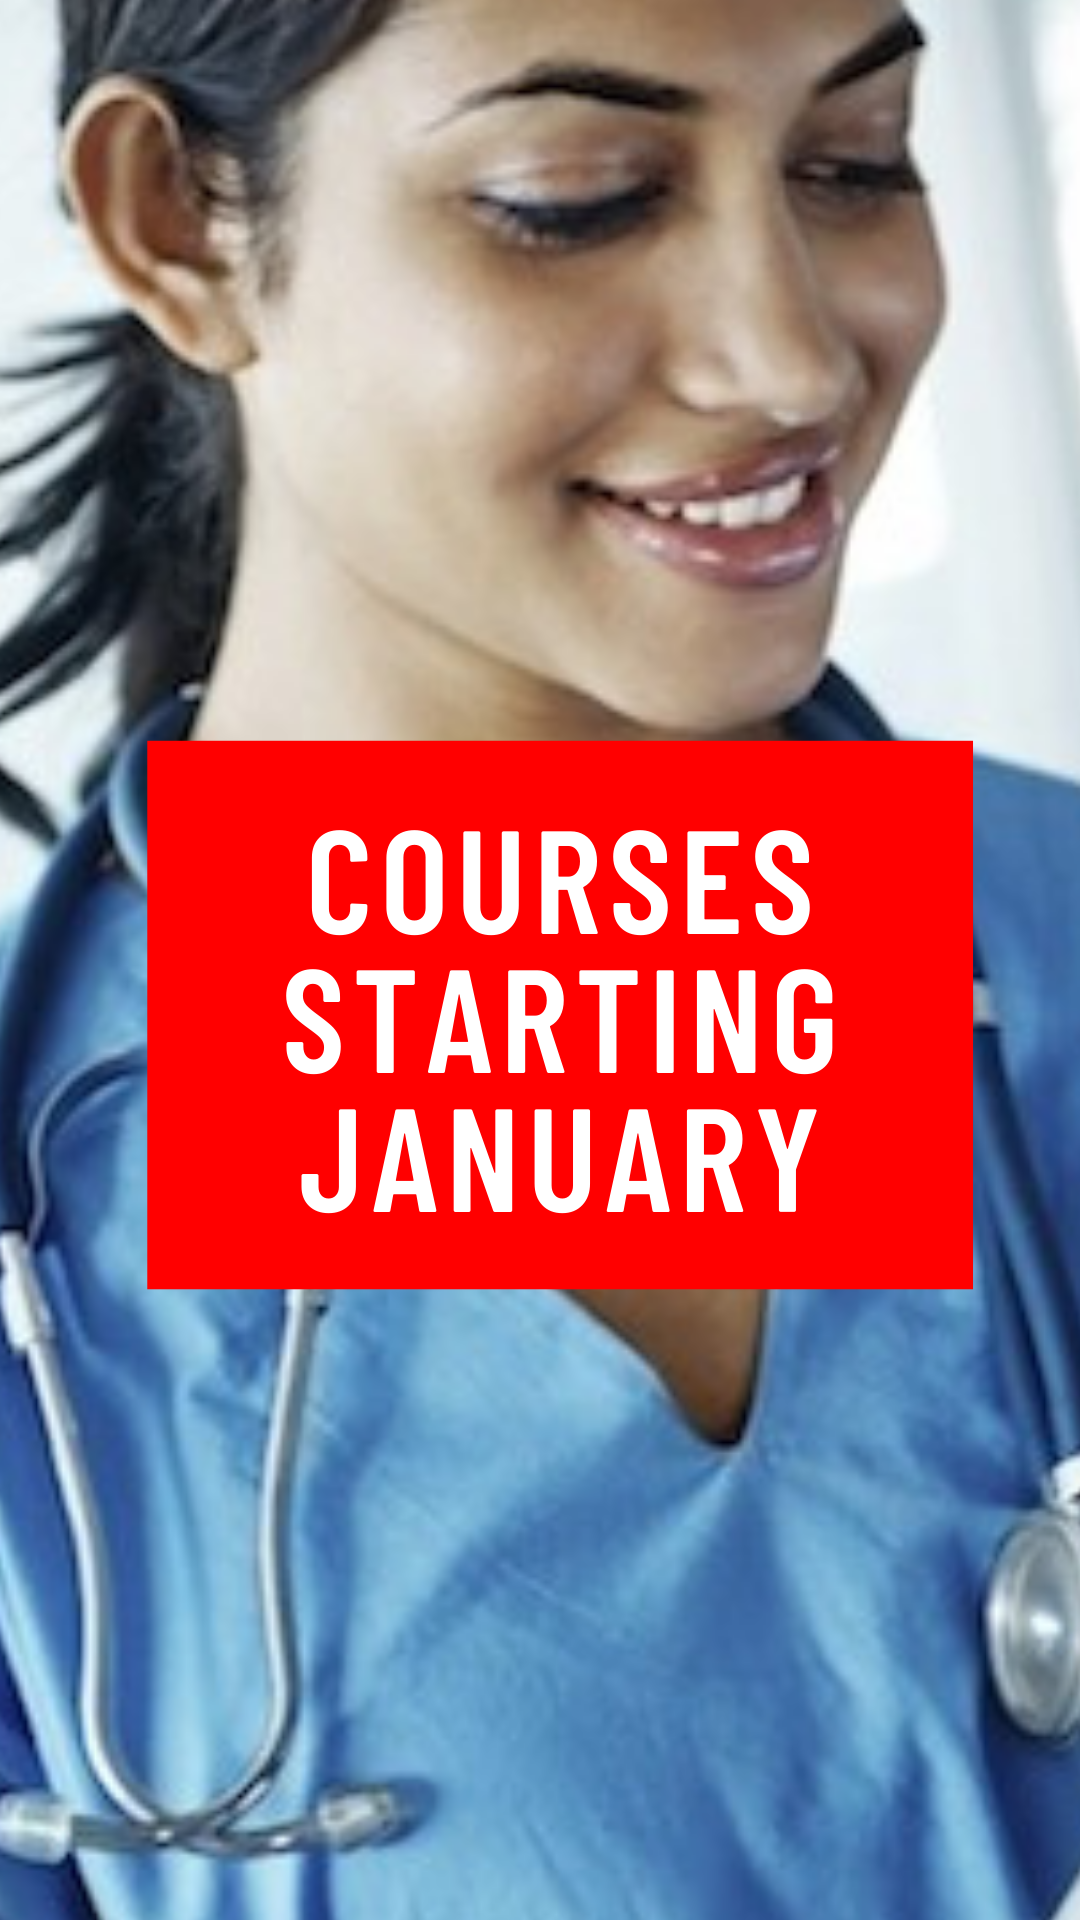 Apply Now - Courses starting January 2022